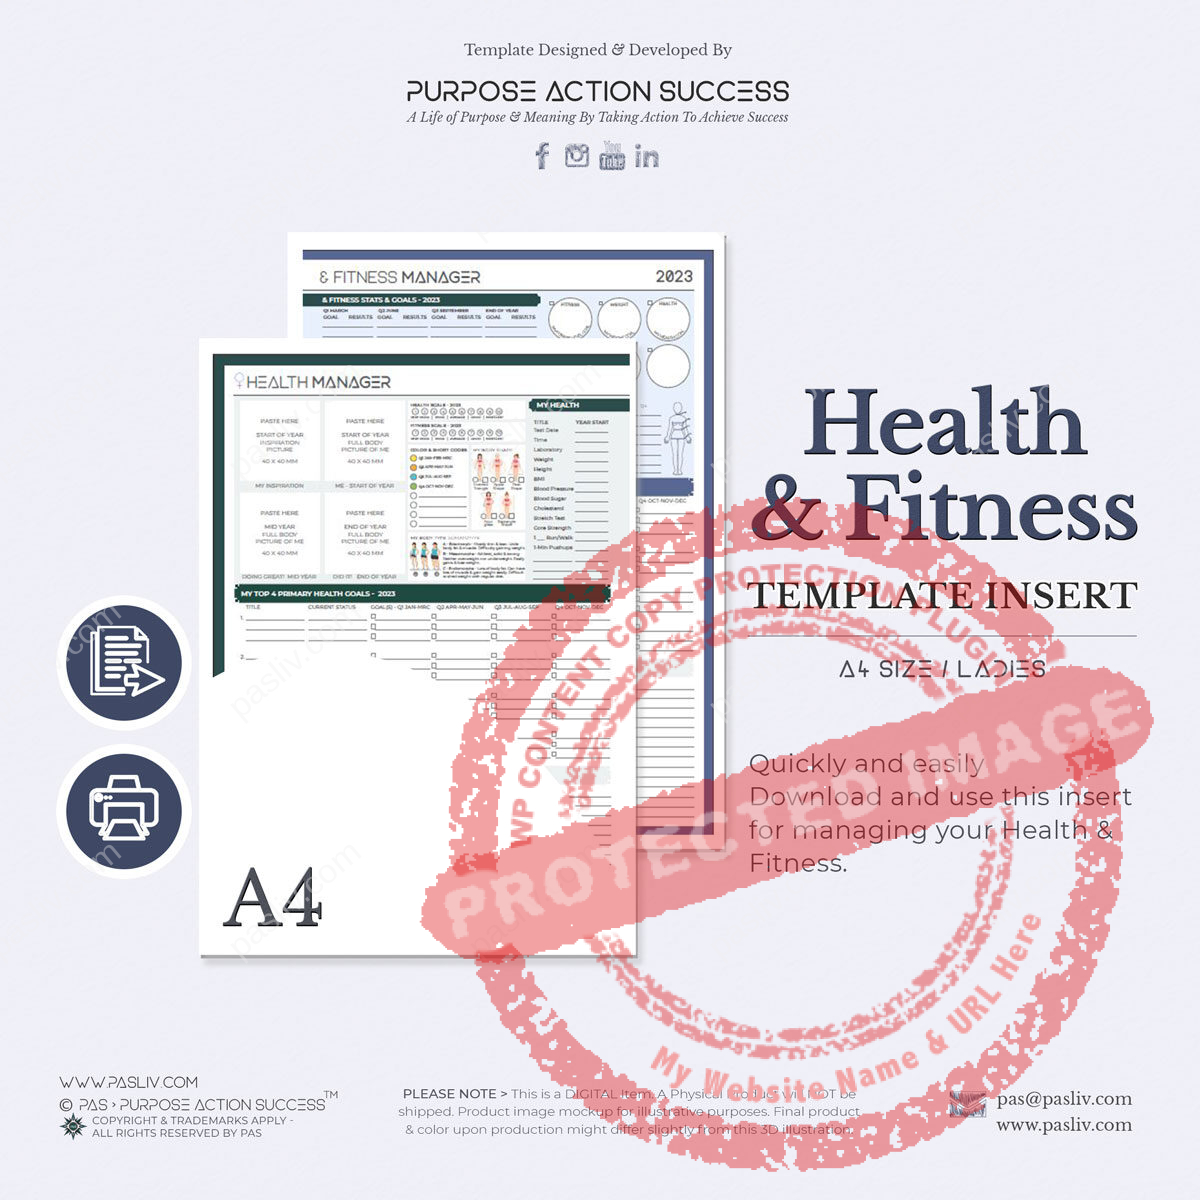 A4 PAS Health & Fitness Template for LADY - Copyright & Trademarks By PAS > Purpose Action Success - All Rights Reserved